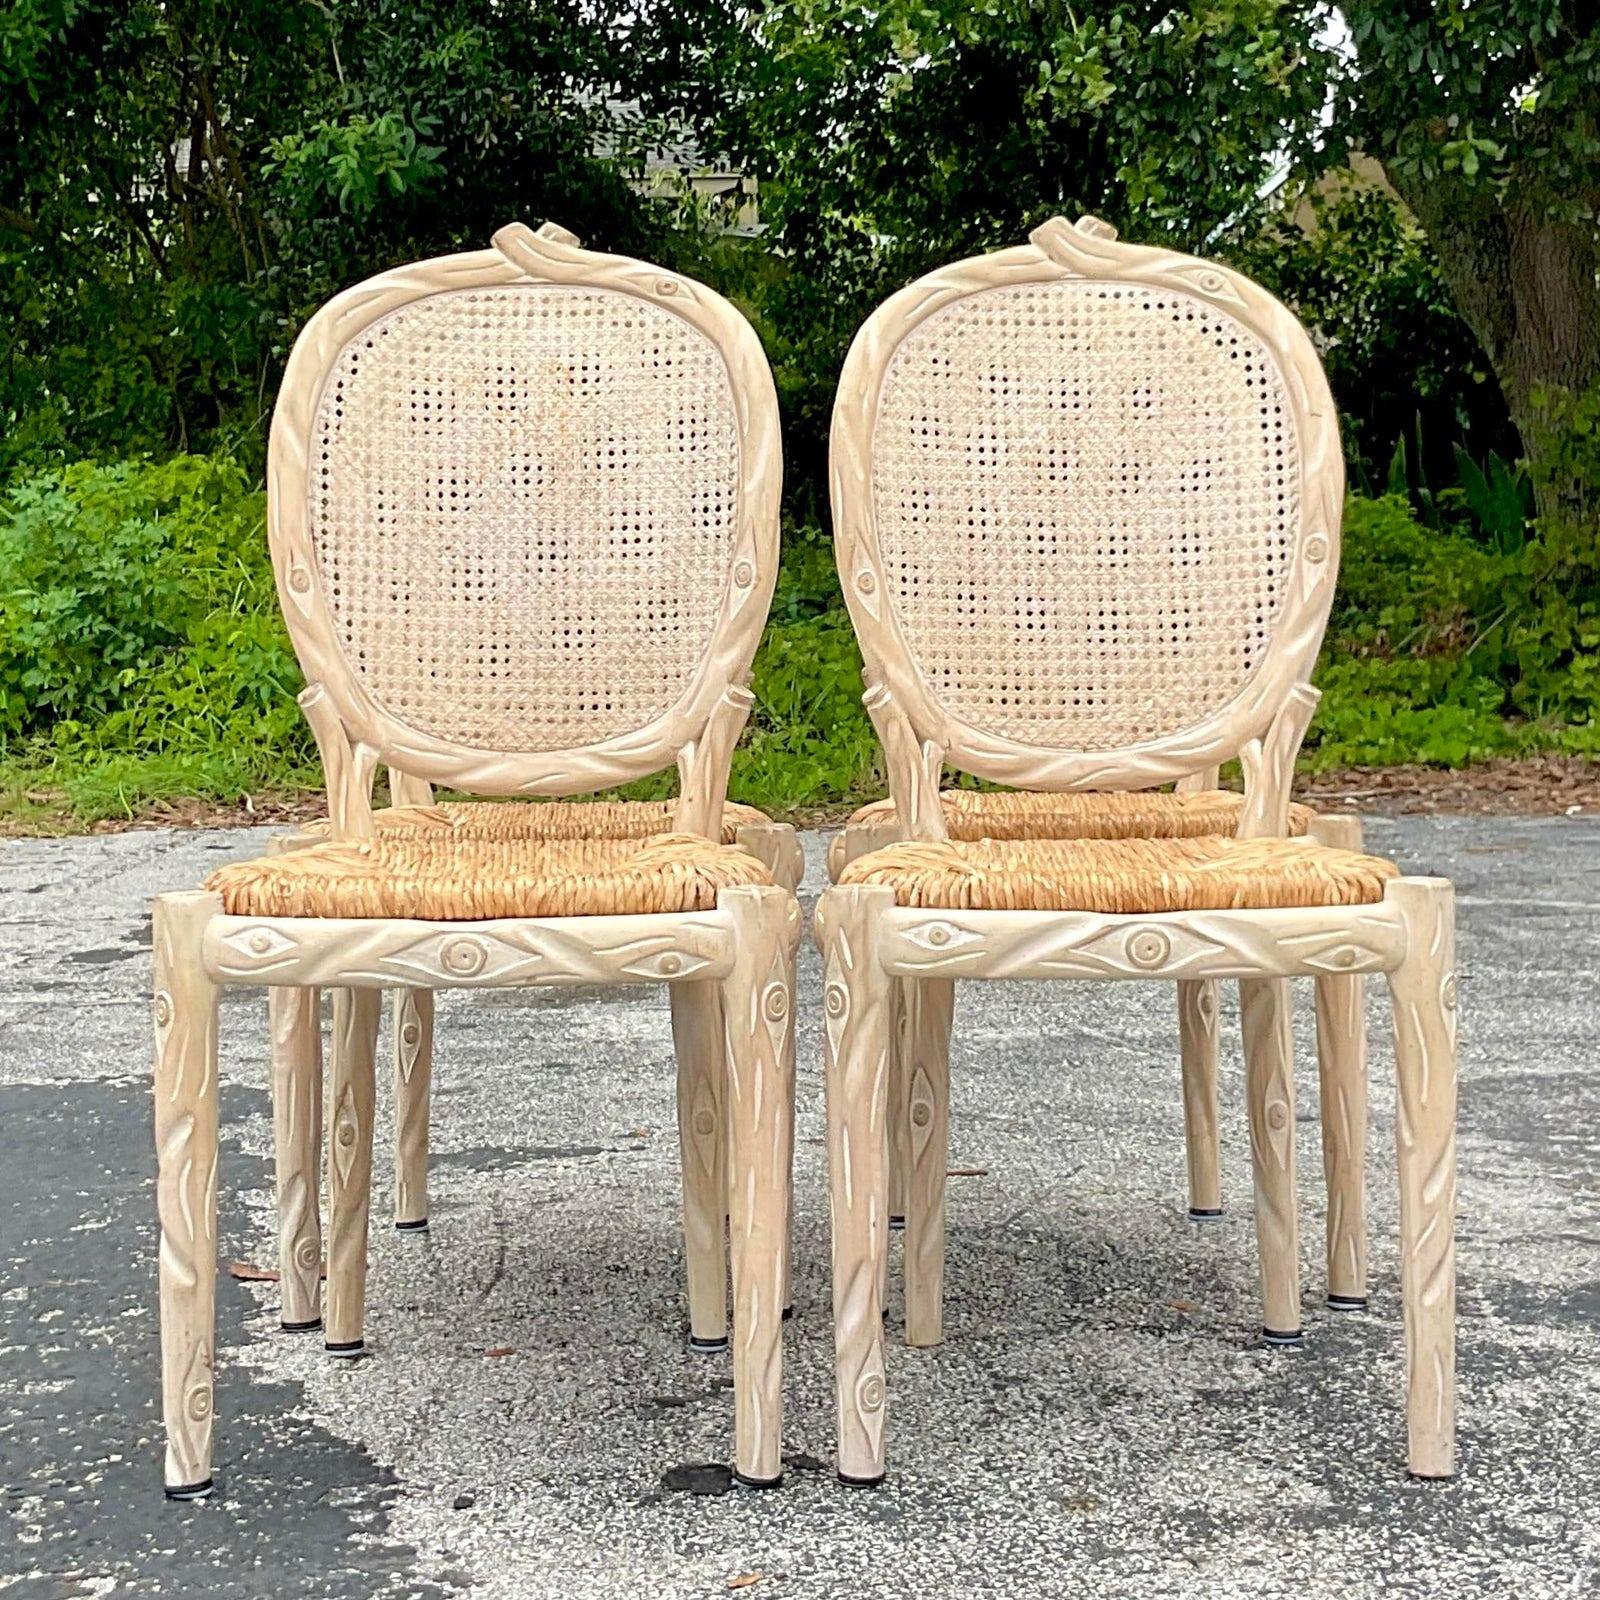 A fabulous set of 4 vintage Boho dining chairs. A chic hand carved Faux Bois design with a cerused finish. Beautiful rush seats are perfect as is or just add a cushion on top. You decide! Acquired from a Palm Beach estate.